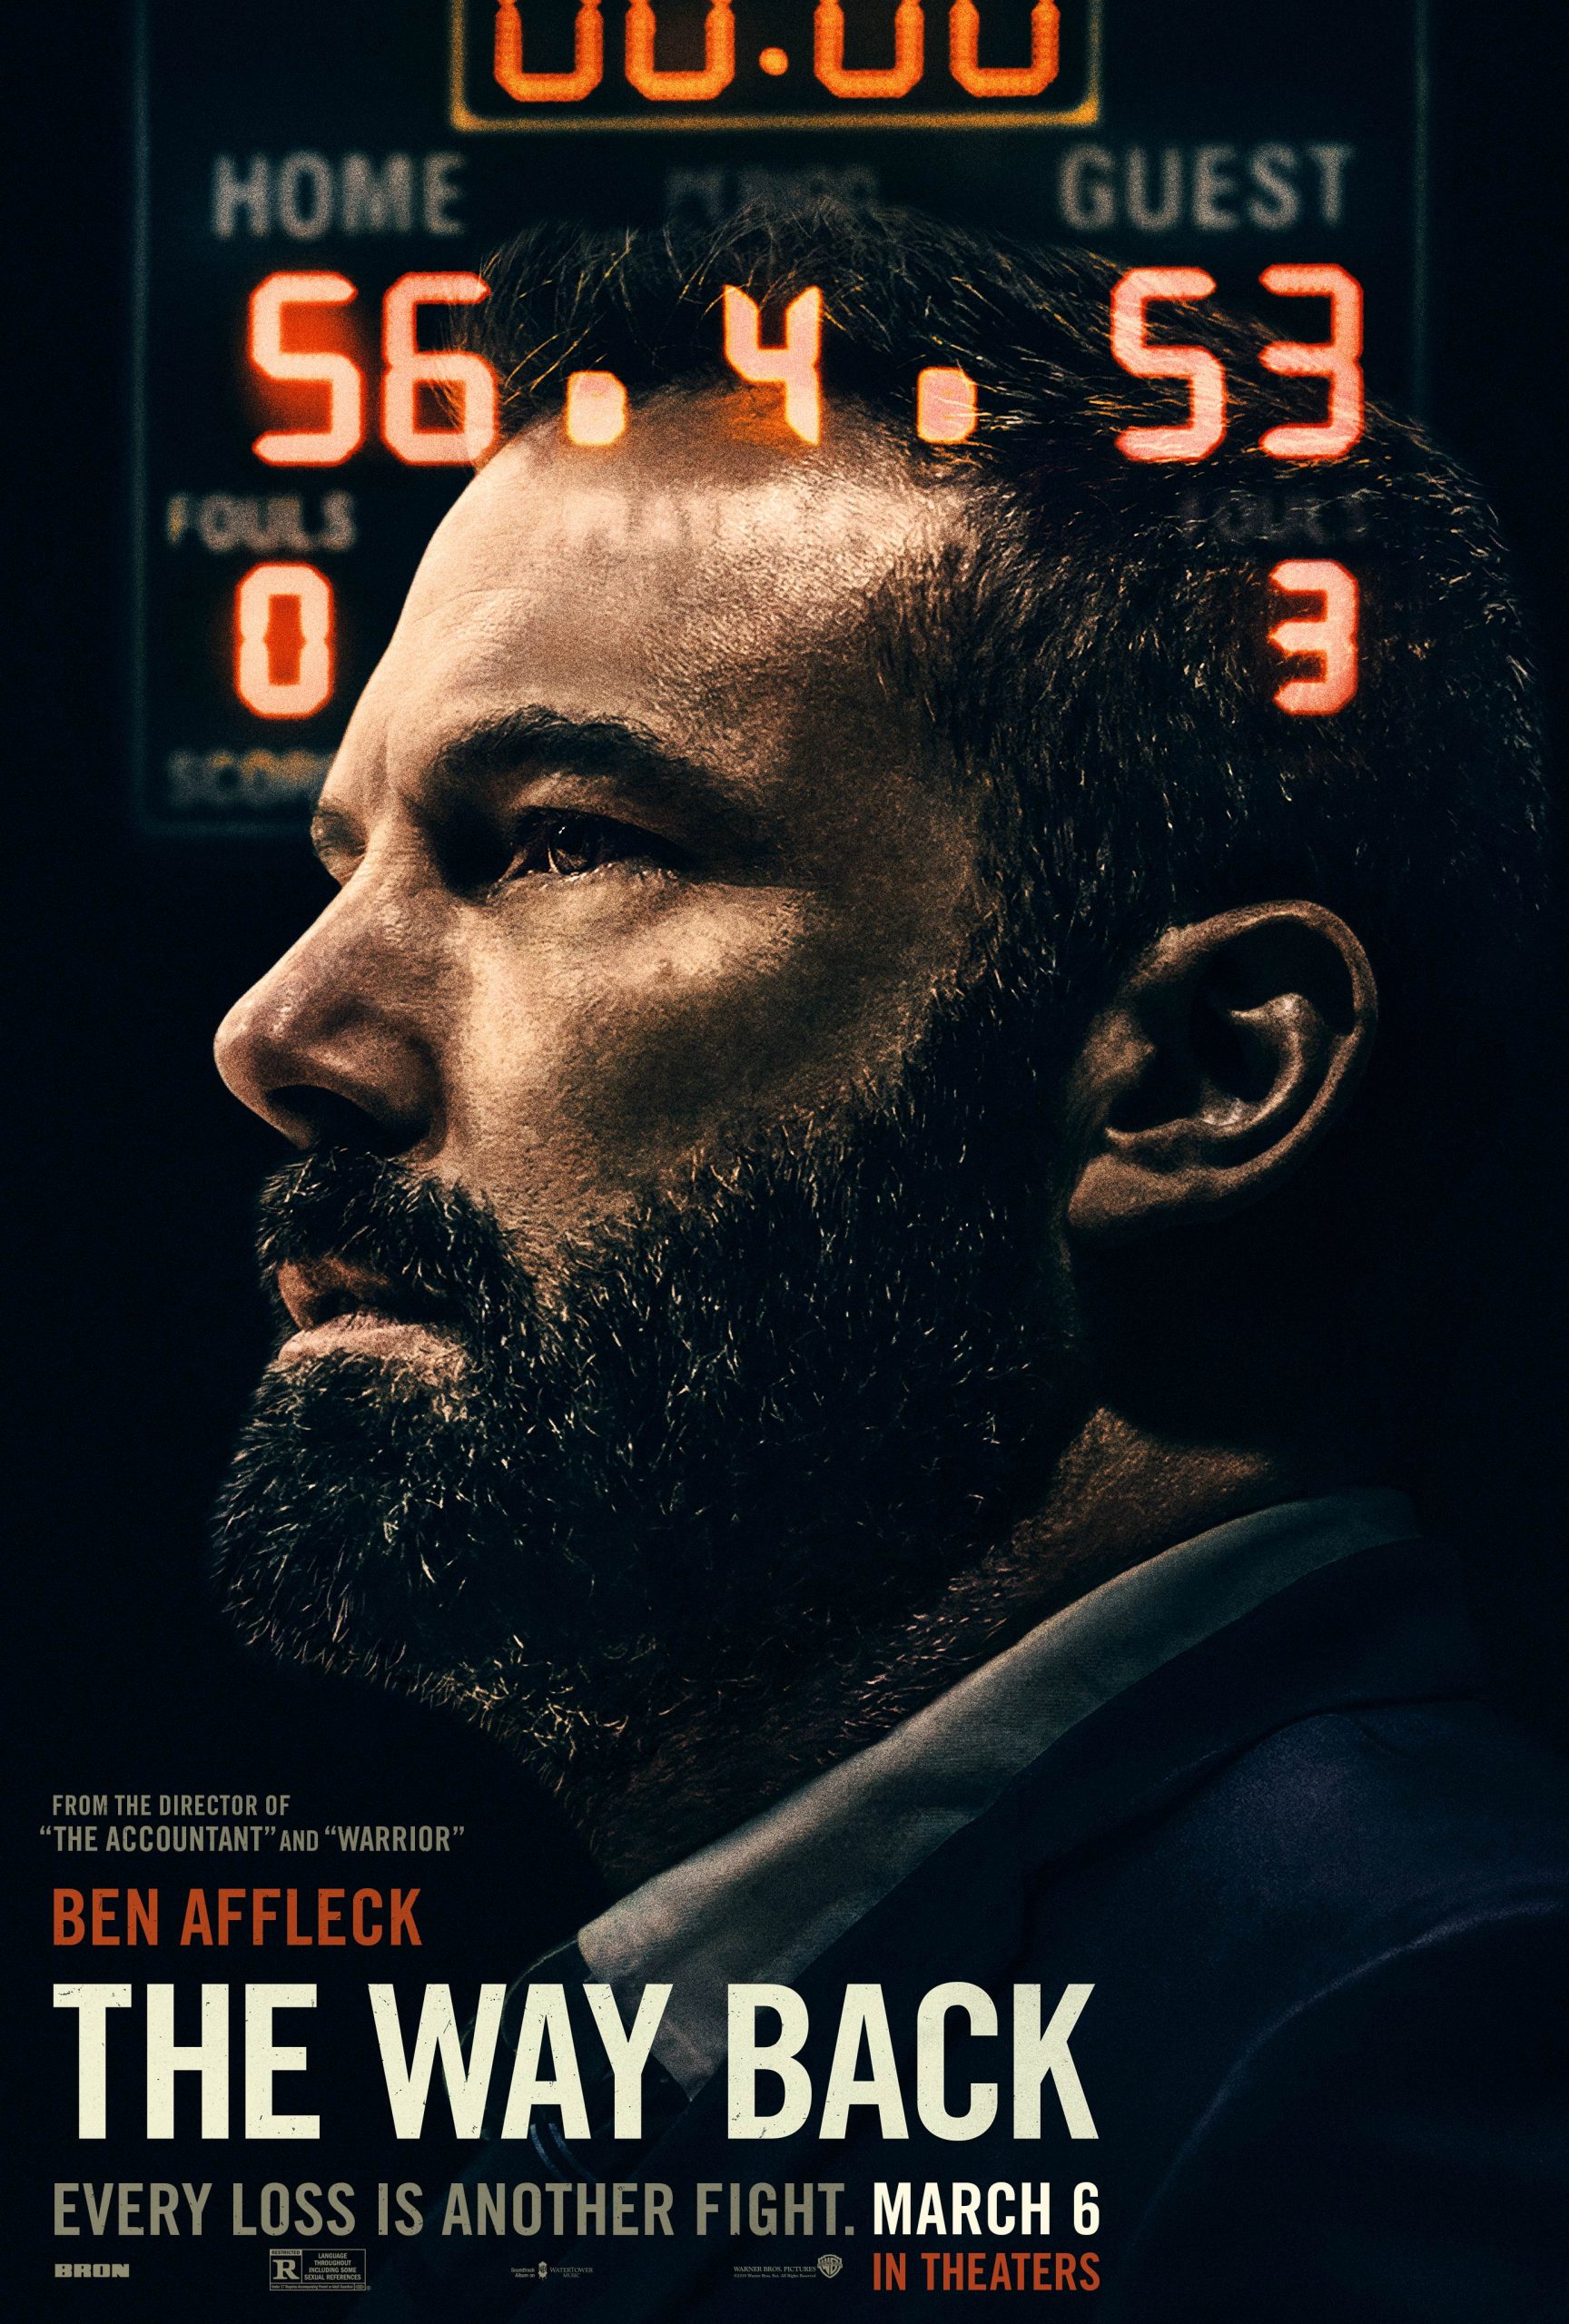 New Movie: The Way Back Starring Ben Affleck